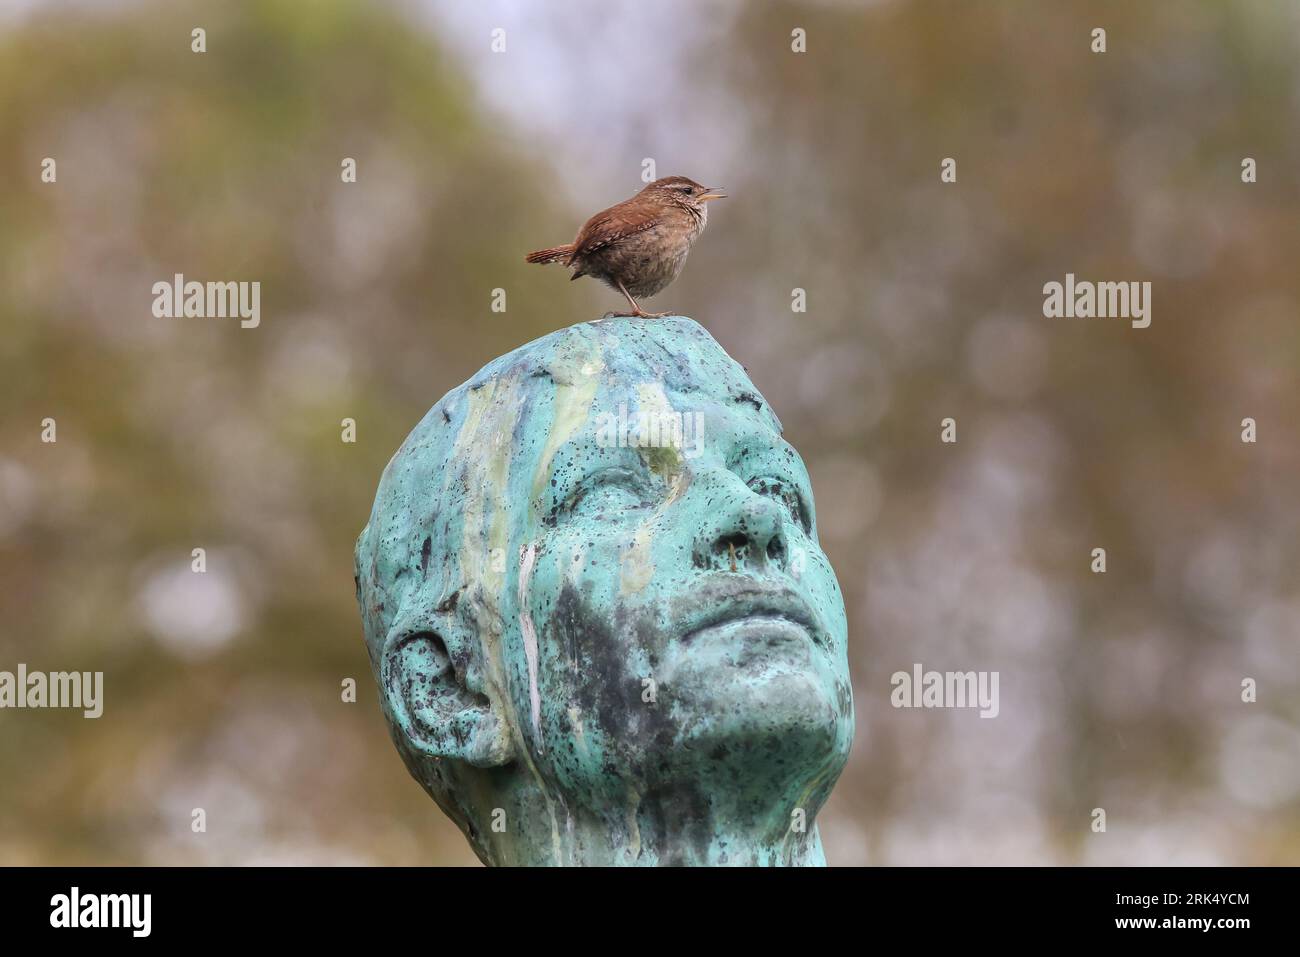 A small bird perched atop the head of a stone statue, looking around inquisitively Stock Photo